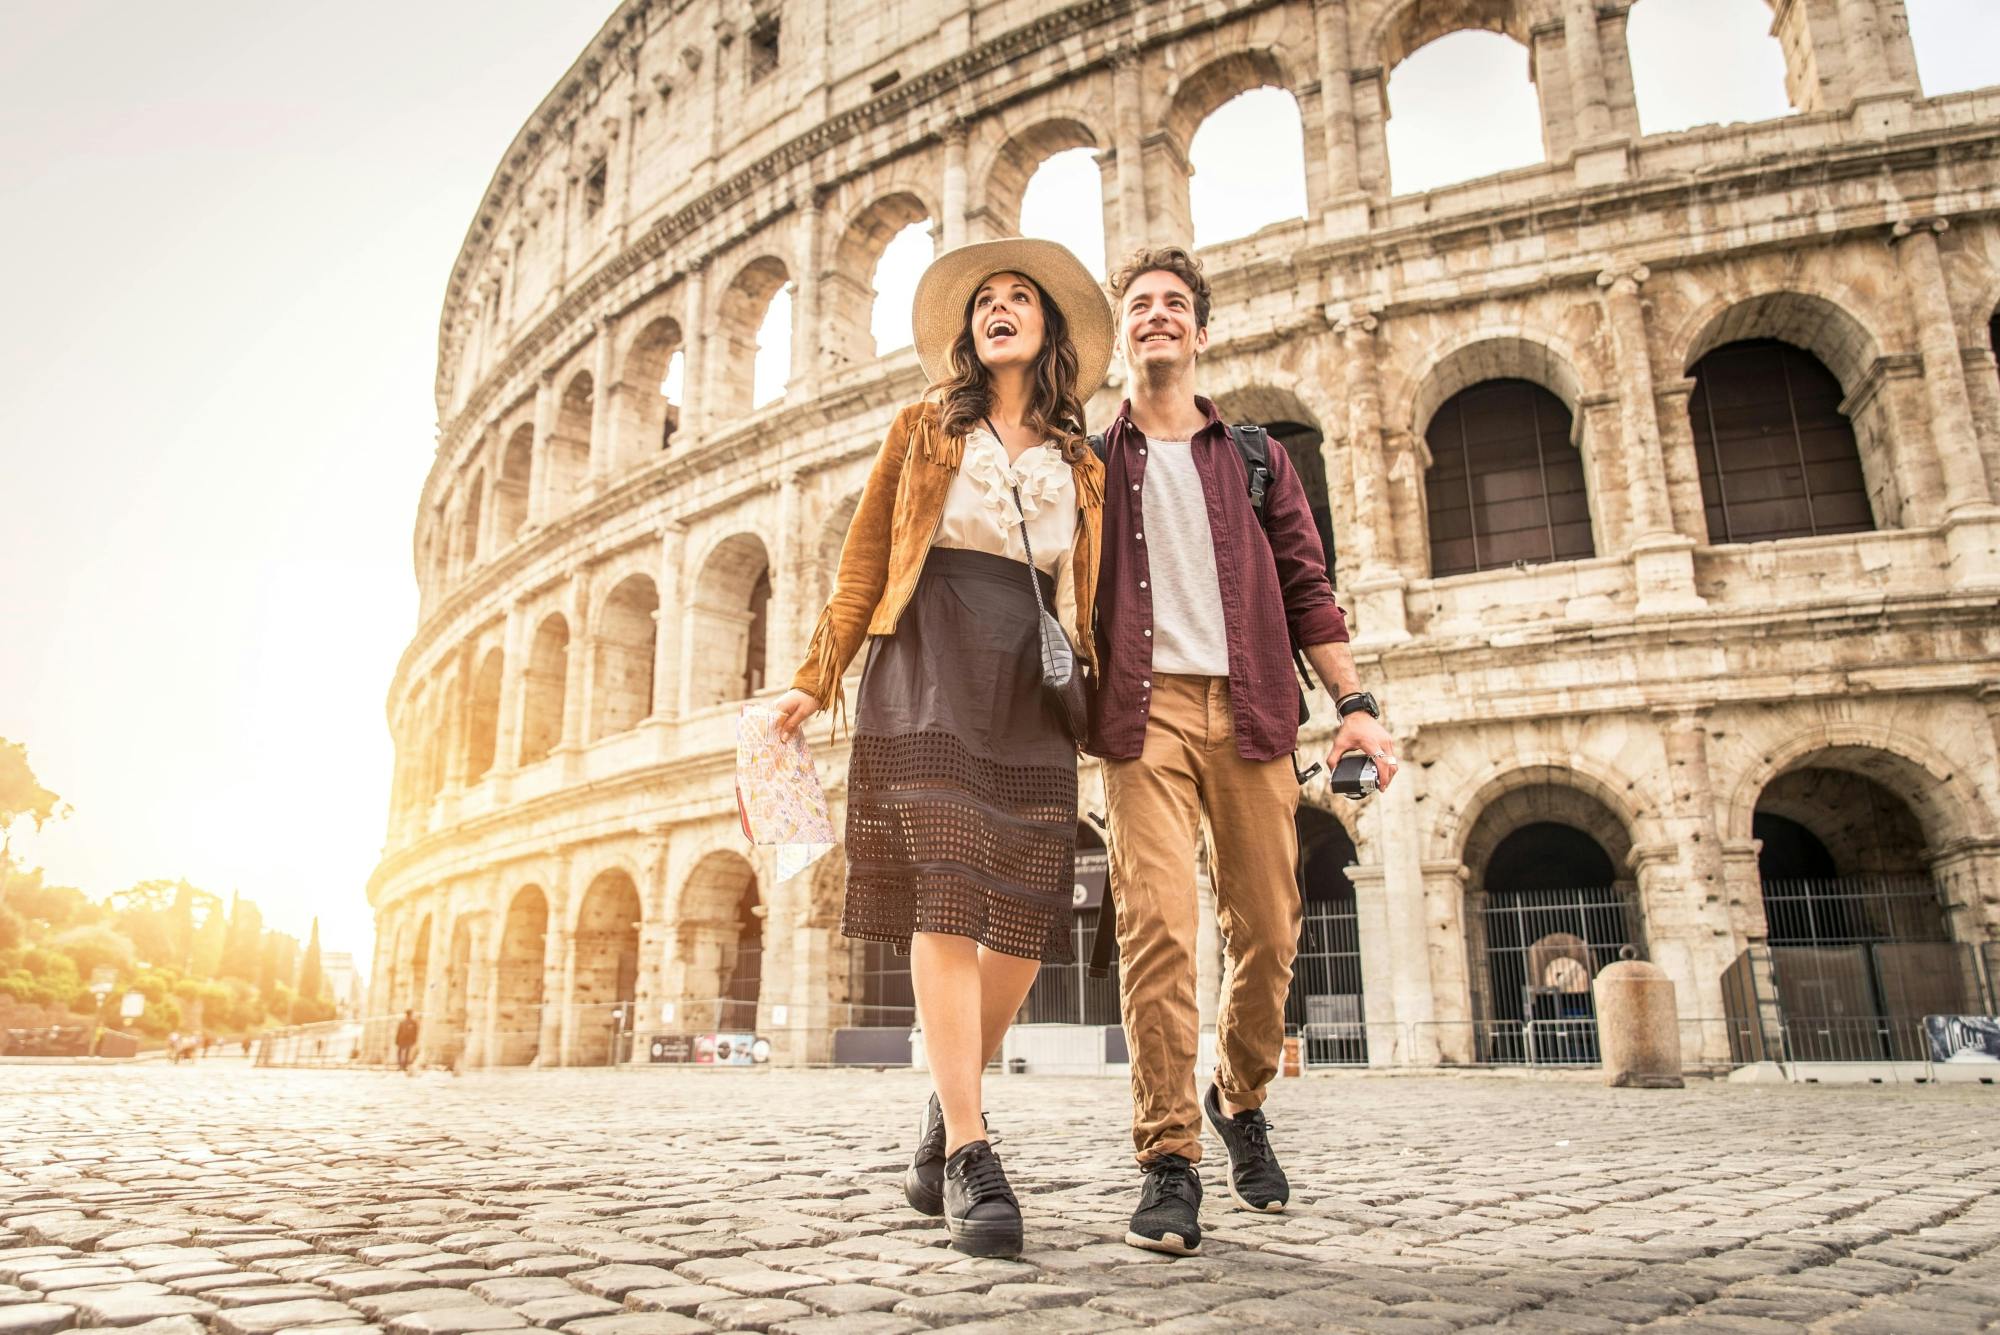 Tickets for Colosseum and Roman Forum with multimedia video Musement